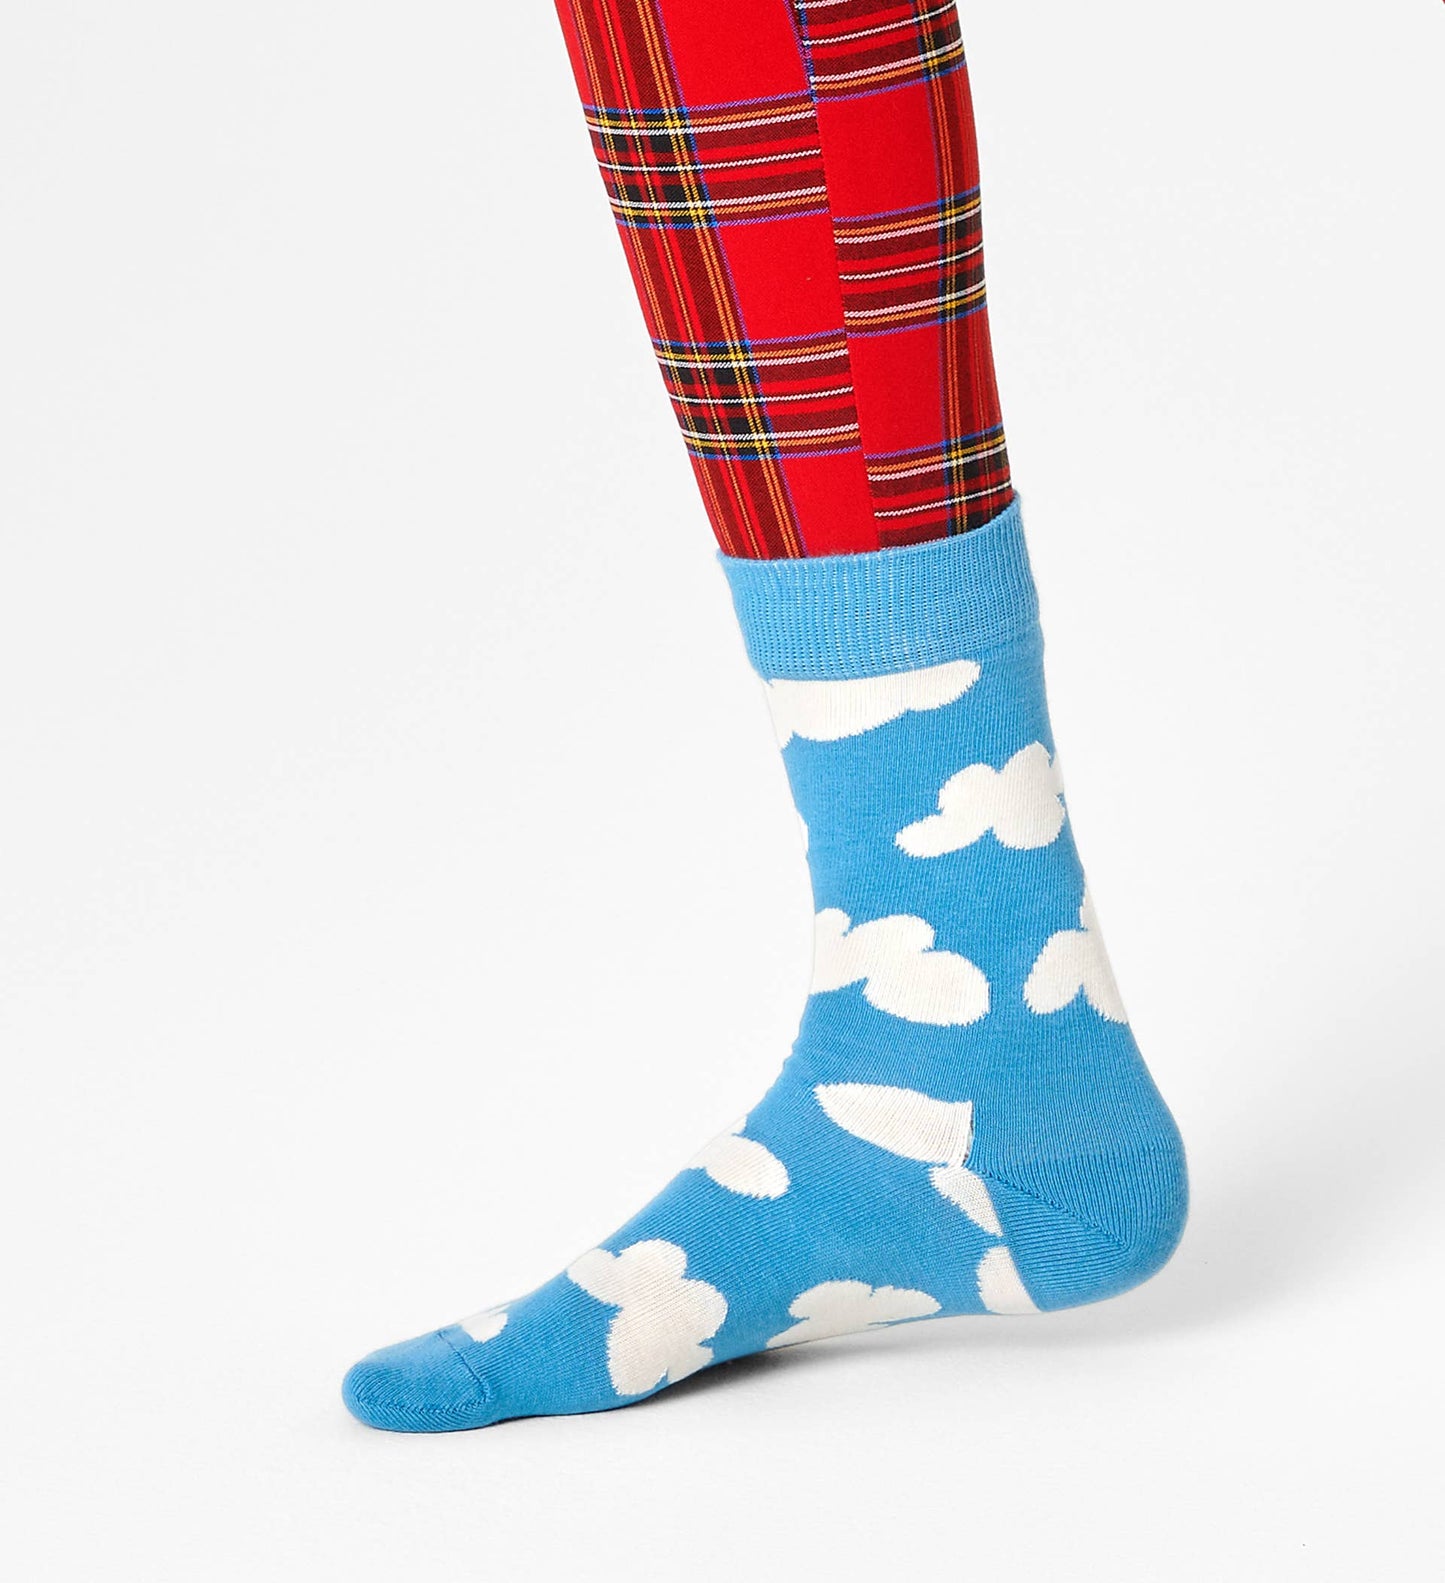 Happy Sock CLO01-6700 Cloudy Sock - Sky blue cotton crew length ankle socks with off white fluffy cumulus clouds pattern. Available in men and women's sizes.